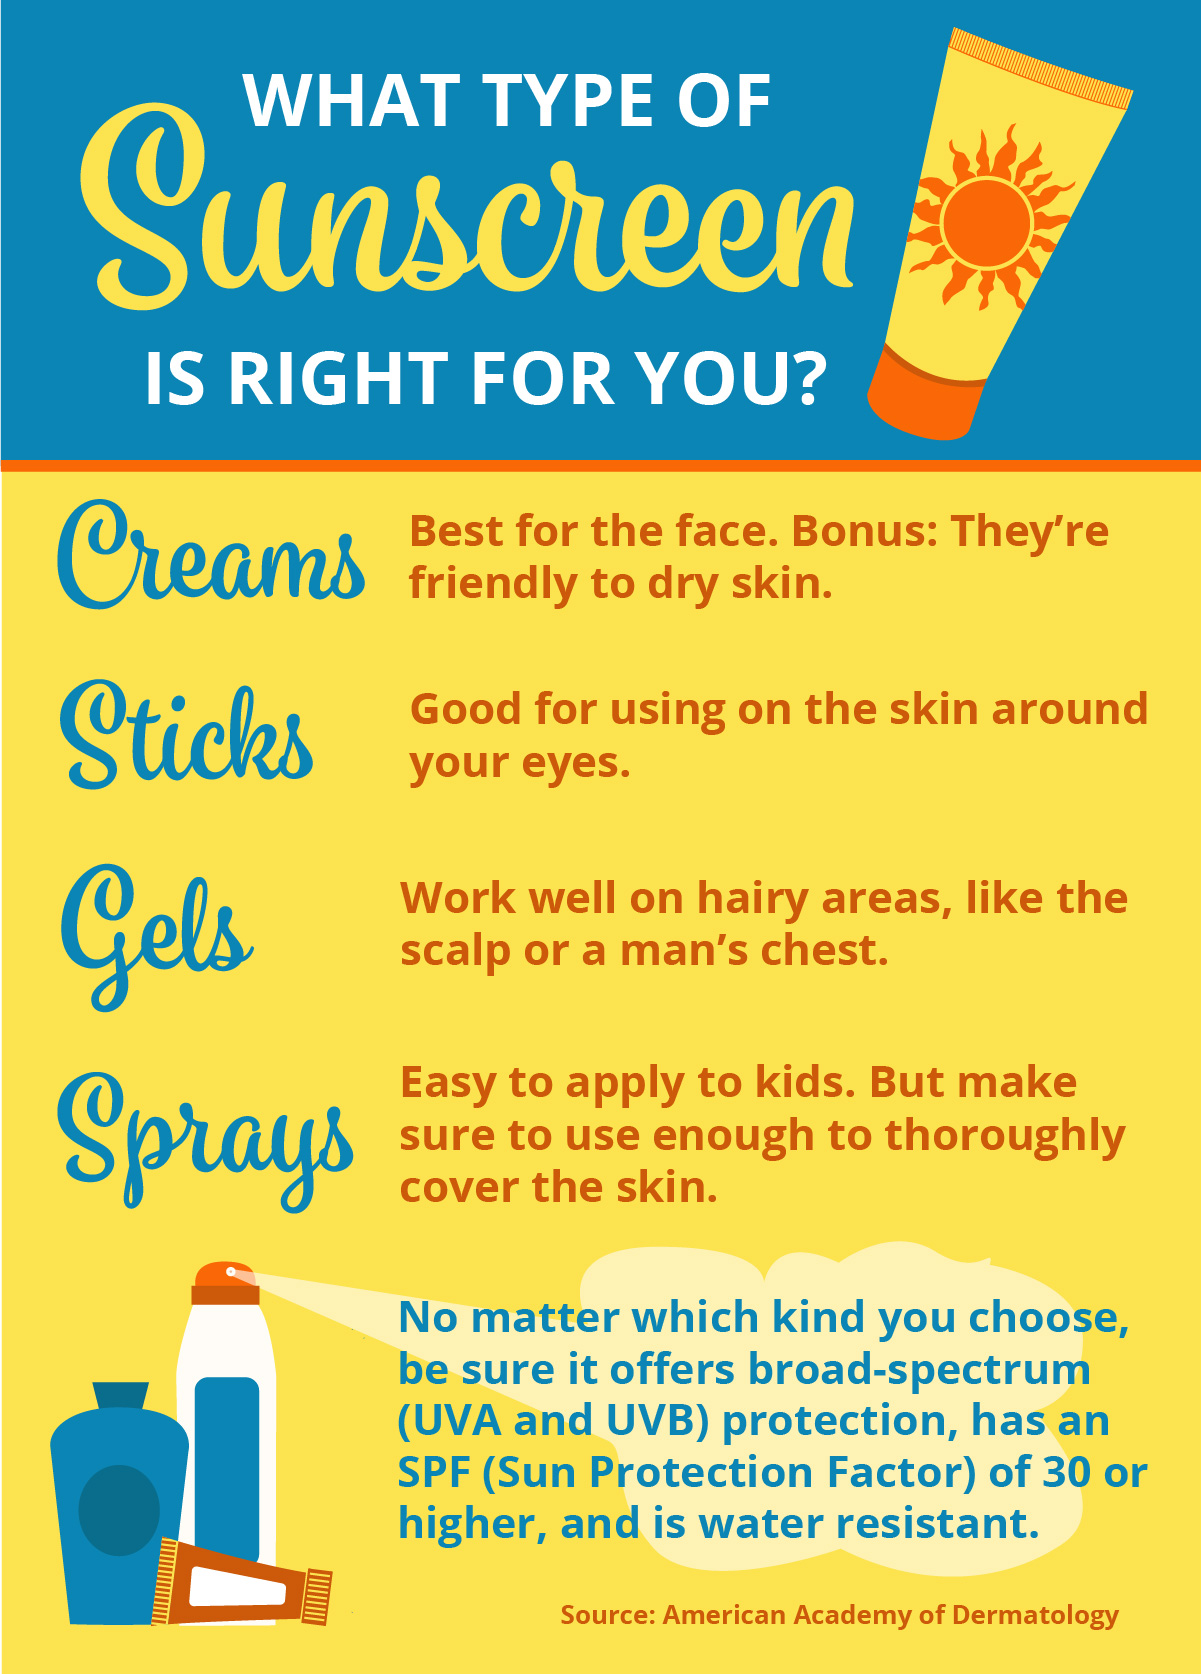 Take your pick of summer sunscreens | Grant Regional Health Center